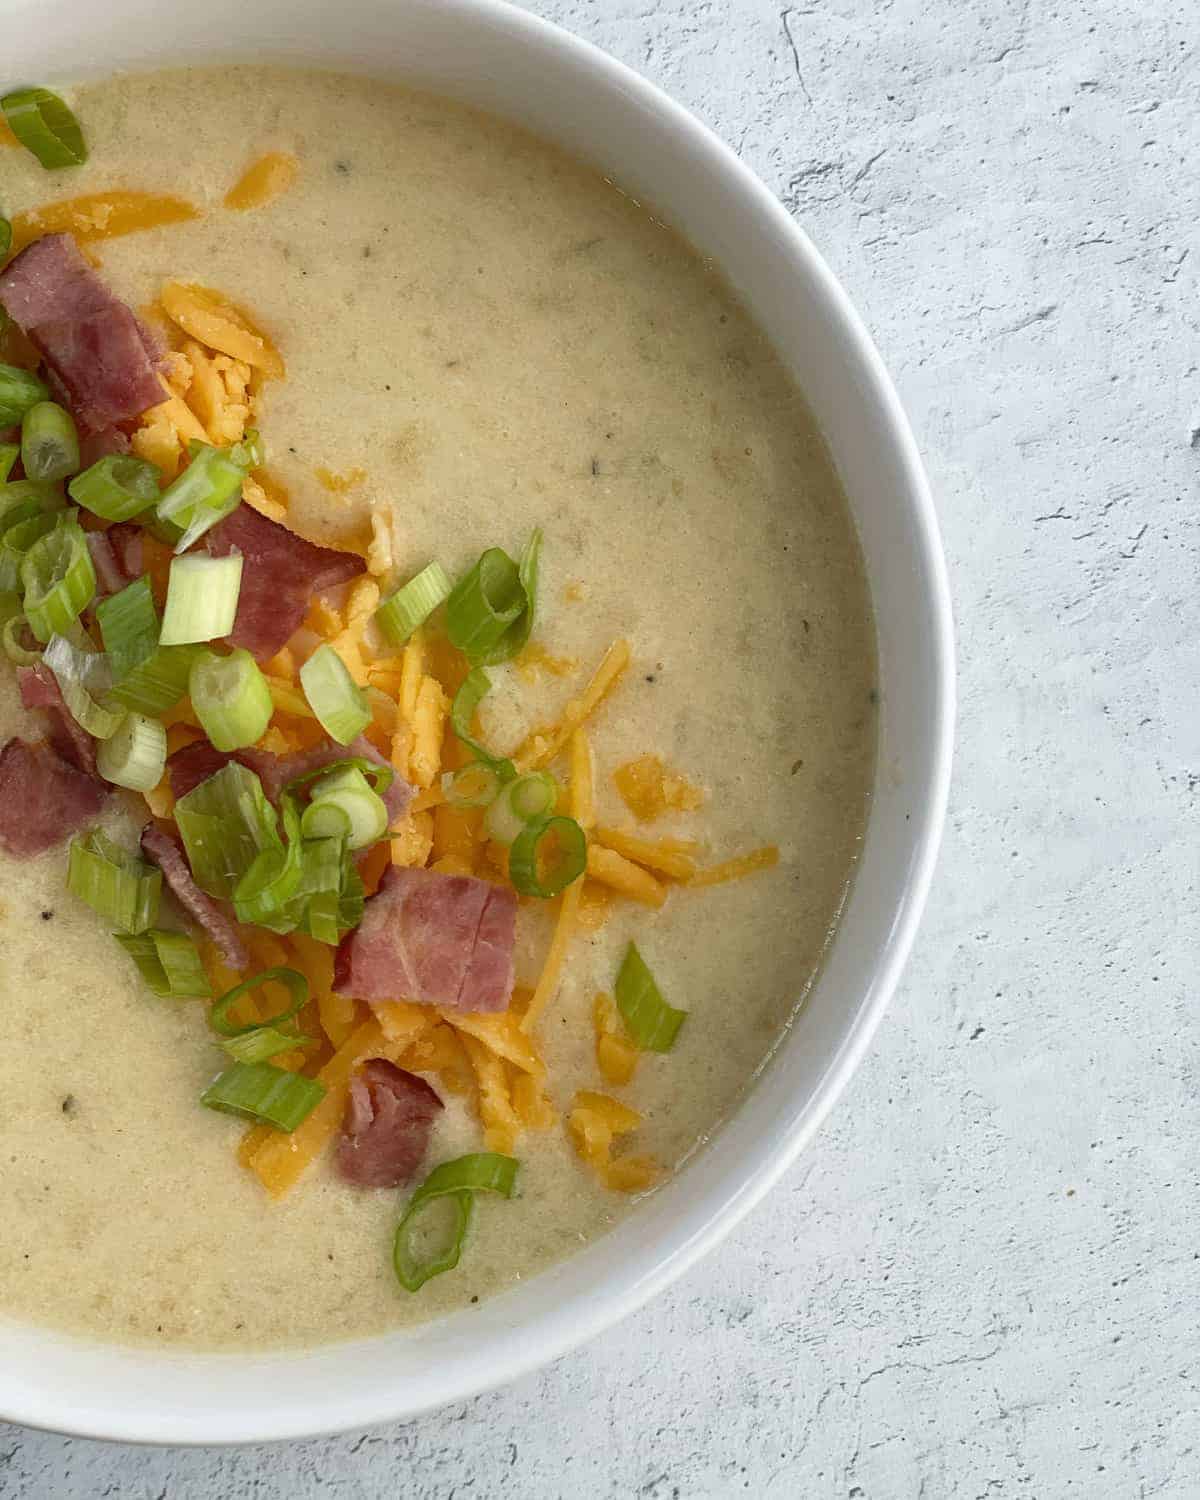 Crockpot potato soup topped with green onions, cheese, and bacon